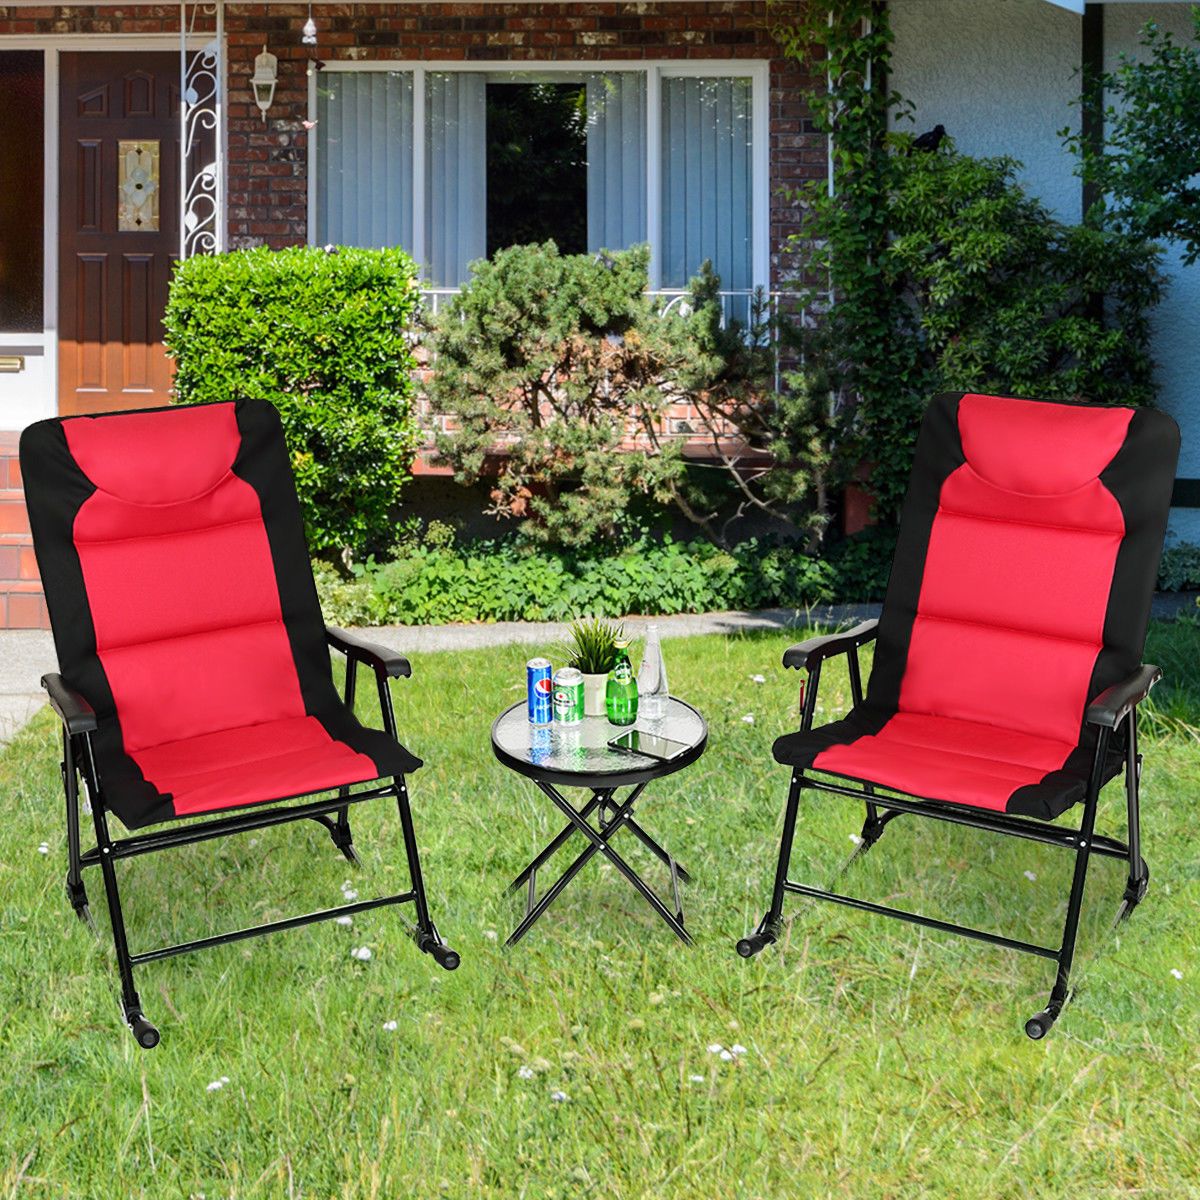 Goplus Red 3 Piece Outdoor Folding Rocking Chair Table Set Bistro Sets Intended For Current Blue 3 Piece Outdoor Seating Sets (View 9 of 15)